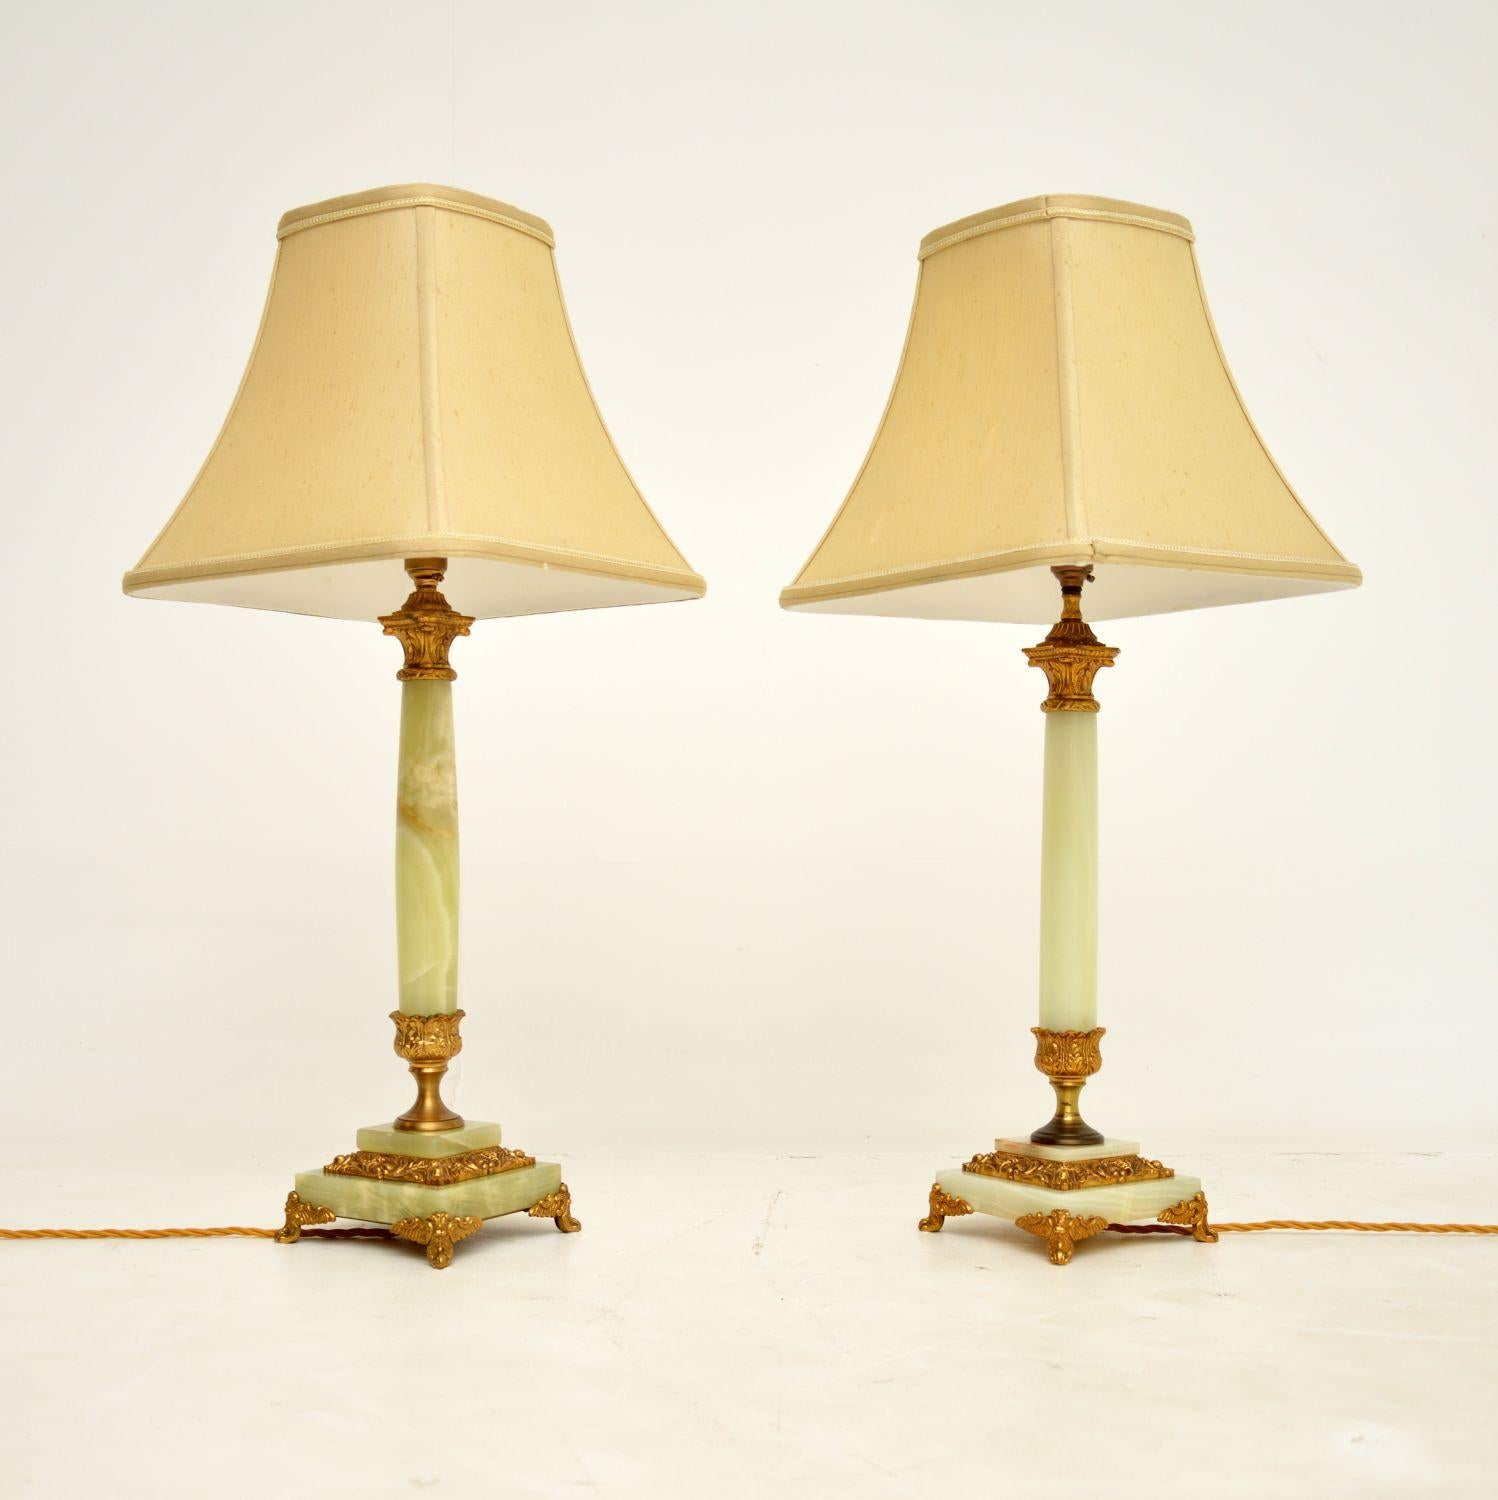 A stunning pair of antique neoclassical style table lamps in onyx and brass. These were made in England, they date from around the 1960’s.

They are of excellent quality and are beautifully made. The onyx is beautiful, with a striking green tone